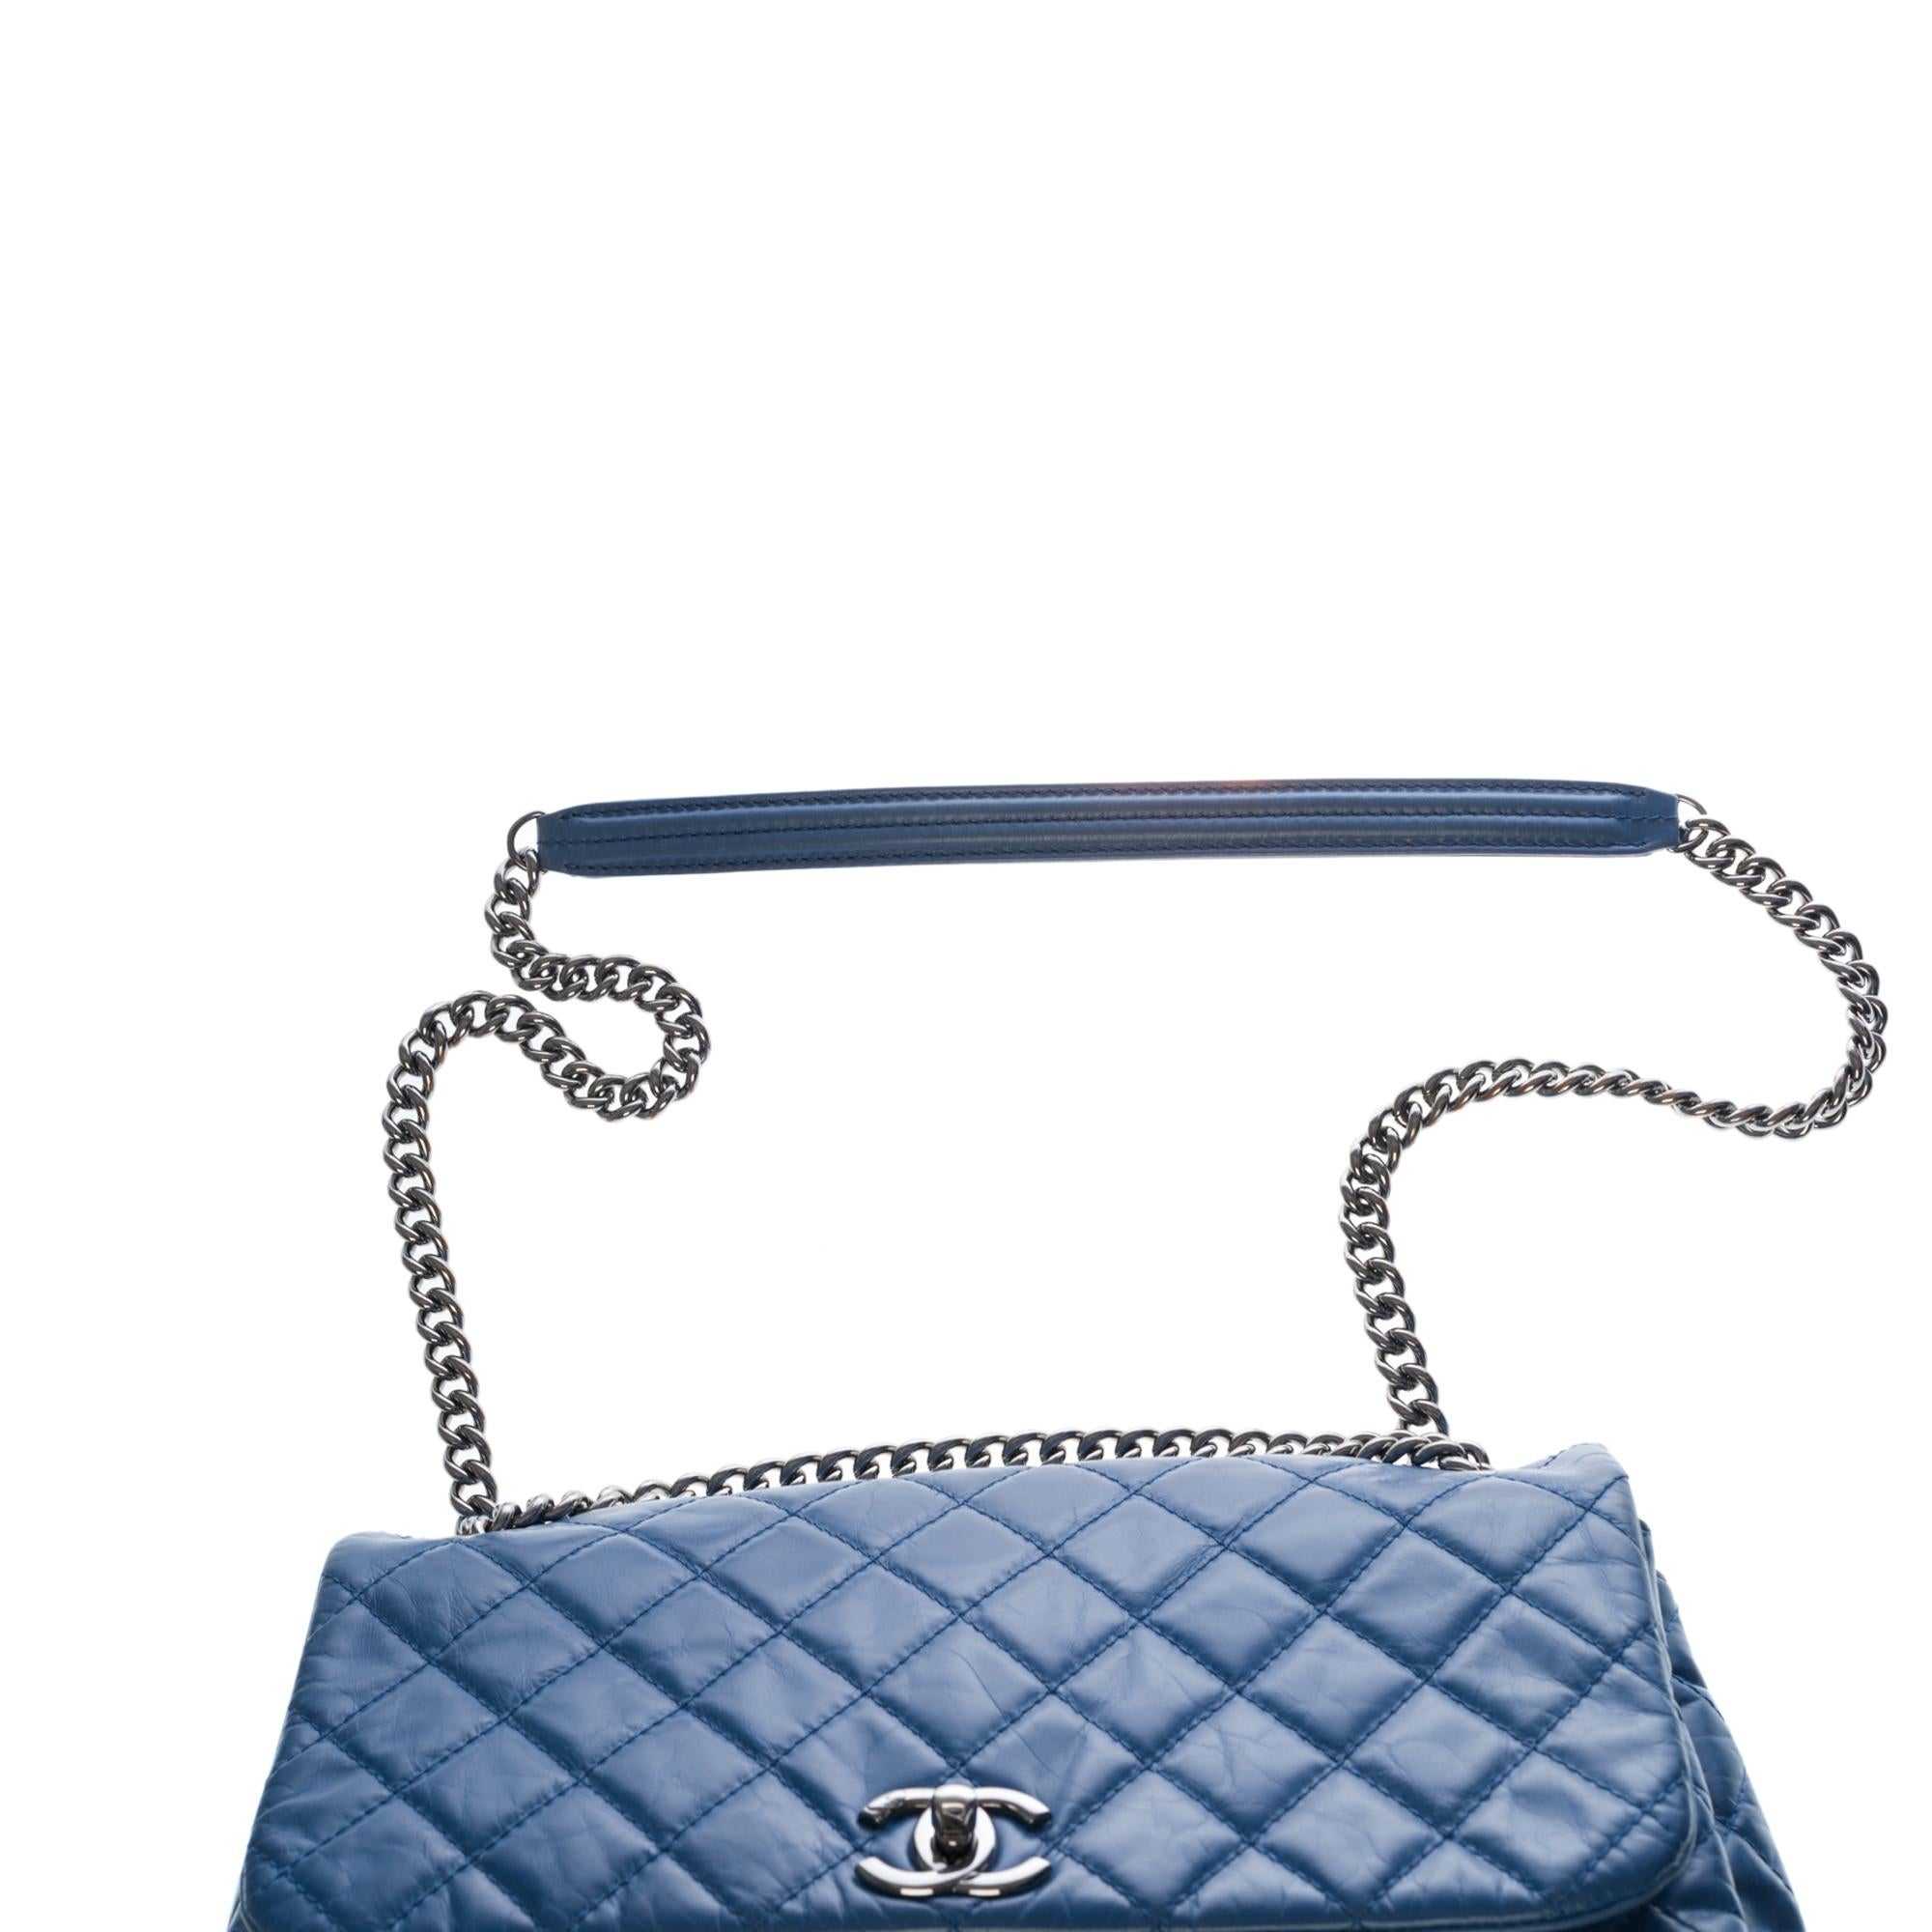 Chanel Classic Maxi Flap shoulder bag in blue quilted lambskin, SHW For Sale 4